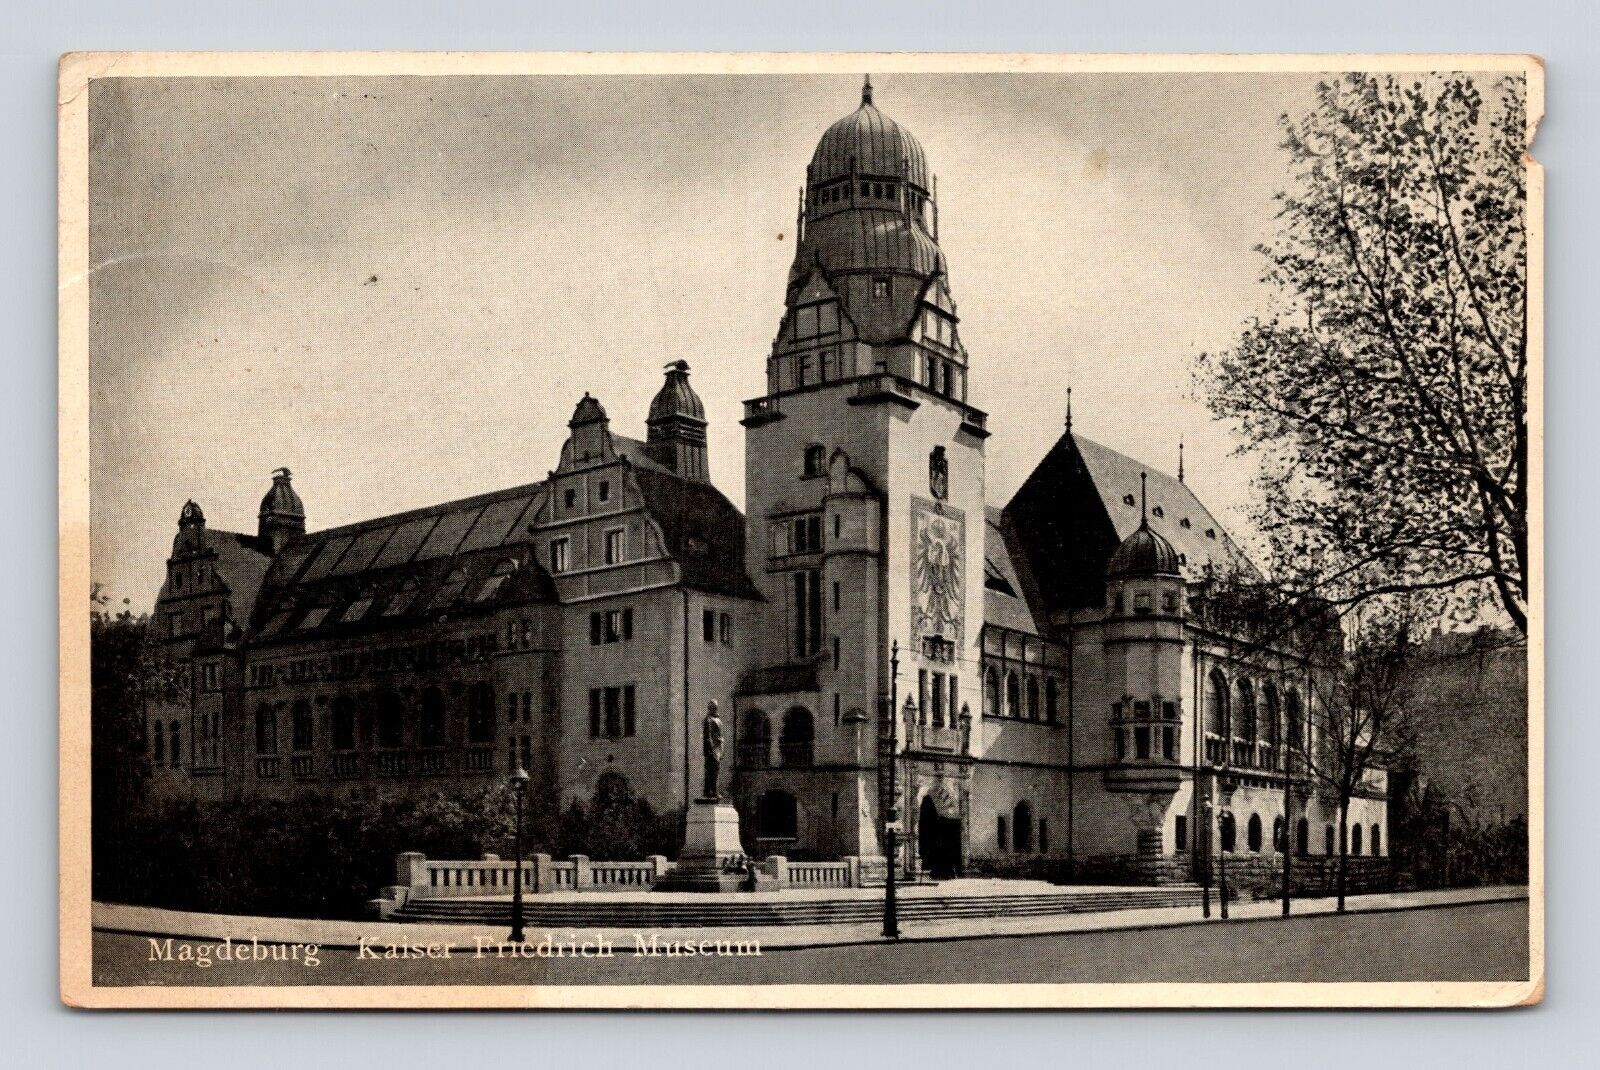 ANTIQUE Old Postcard RPPC GERMANY MAGDEBURG KAISER FRIEDRICH MUSEUM 1936